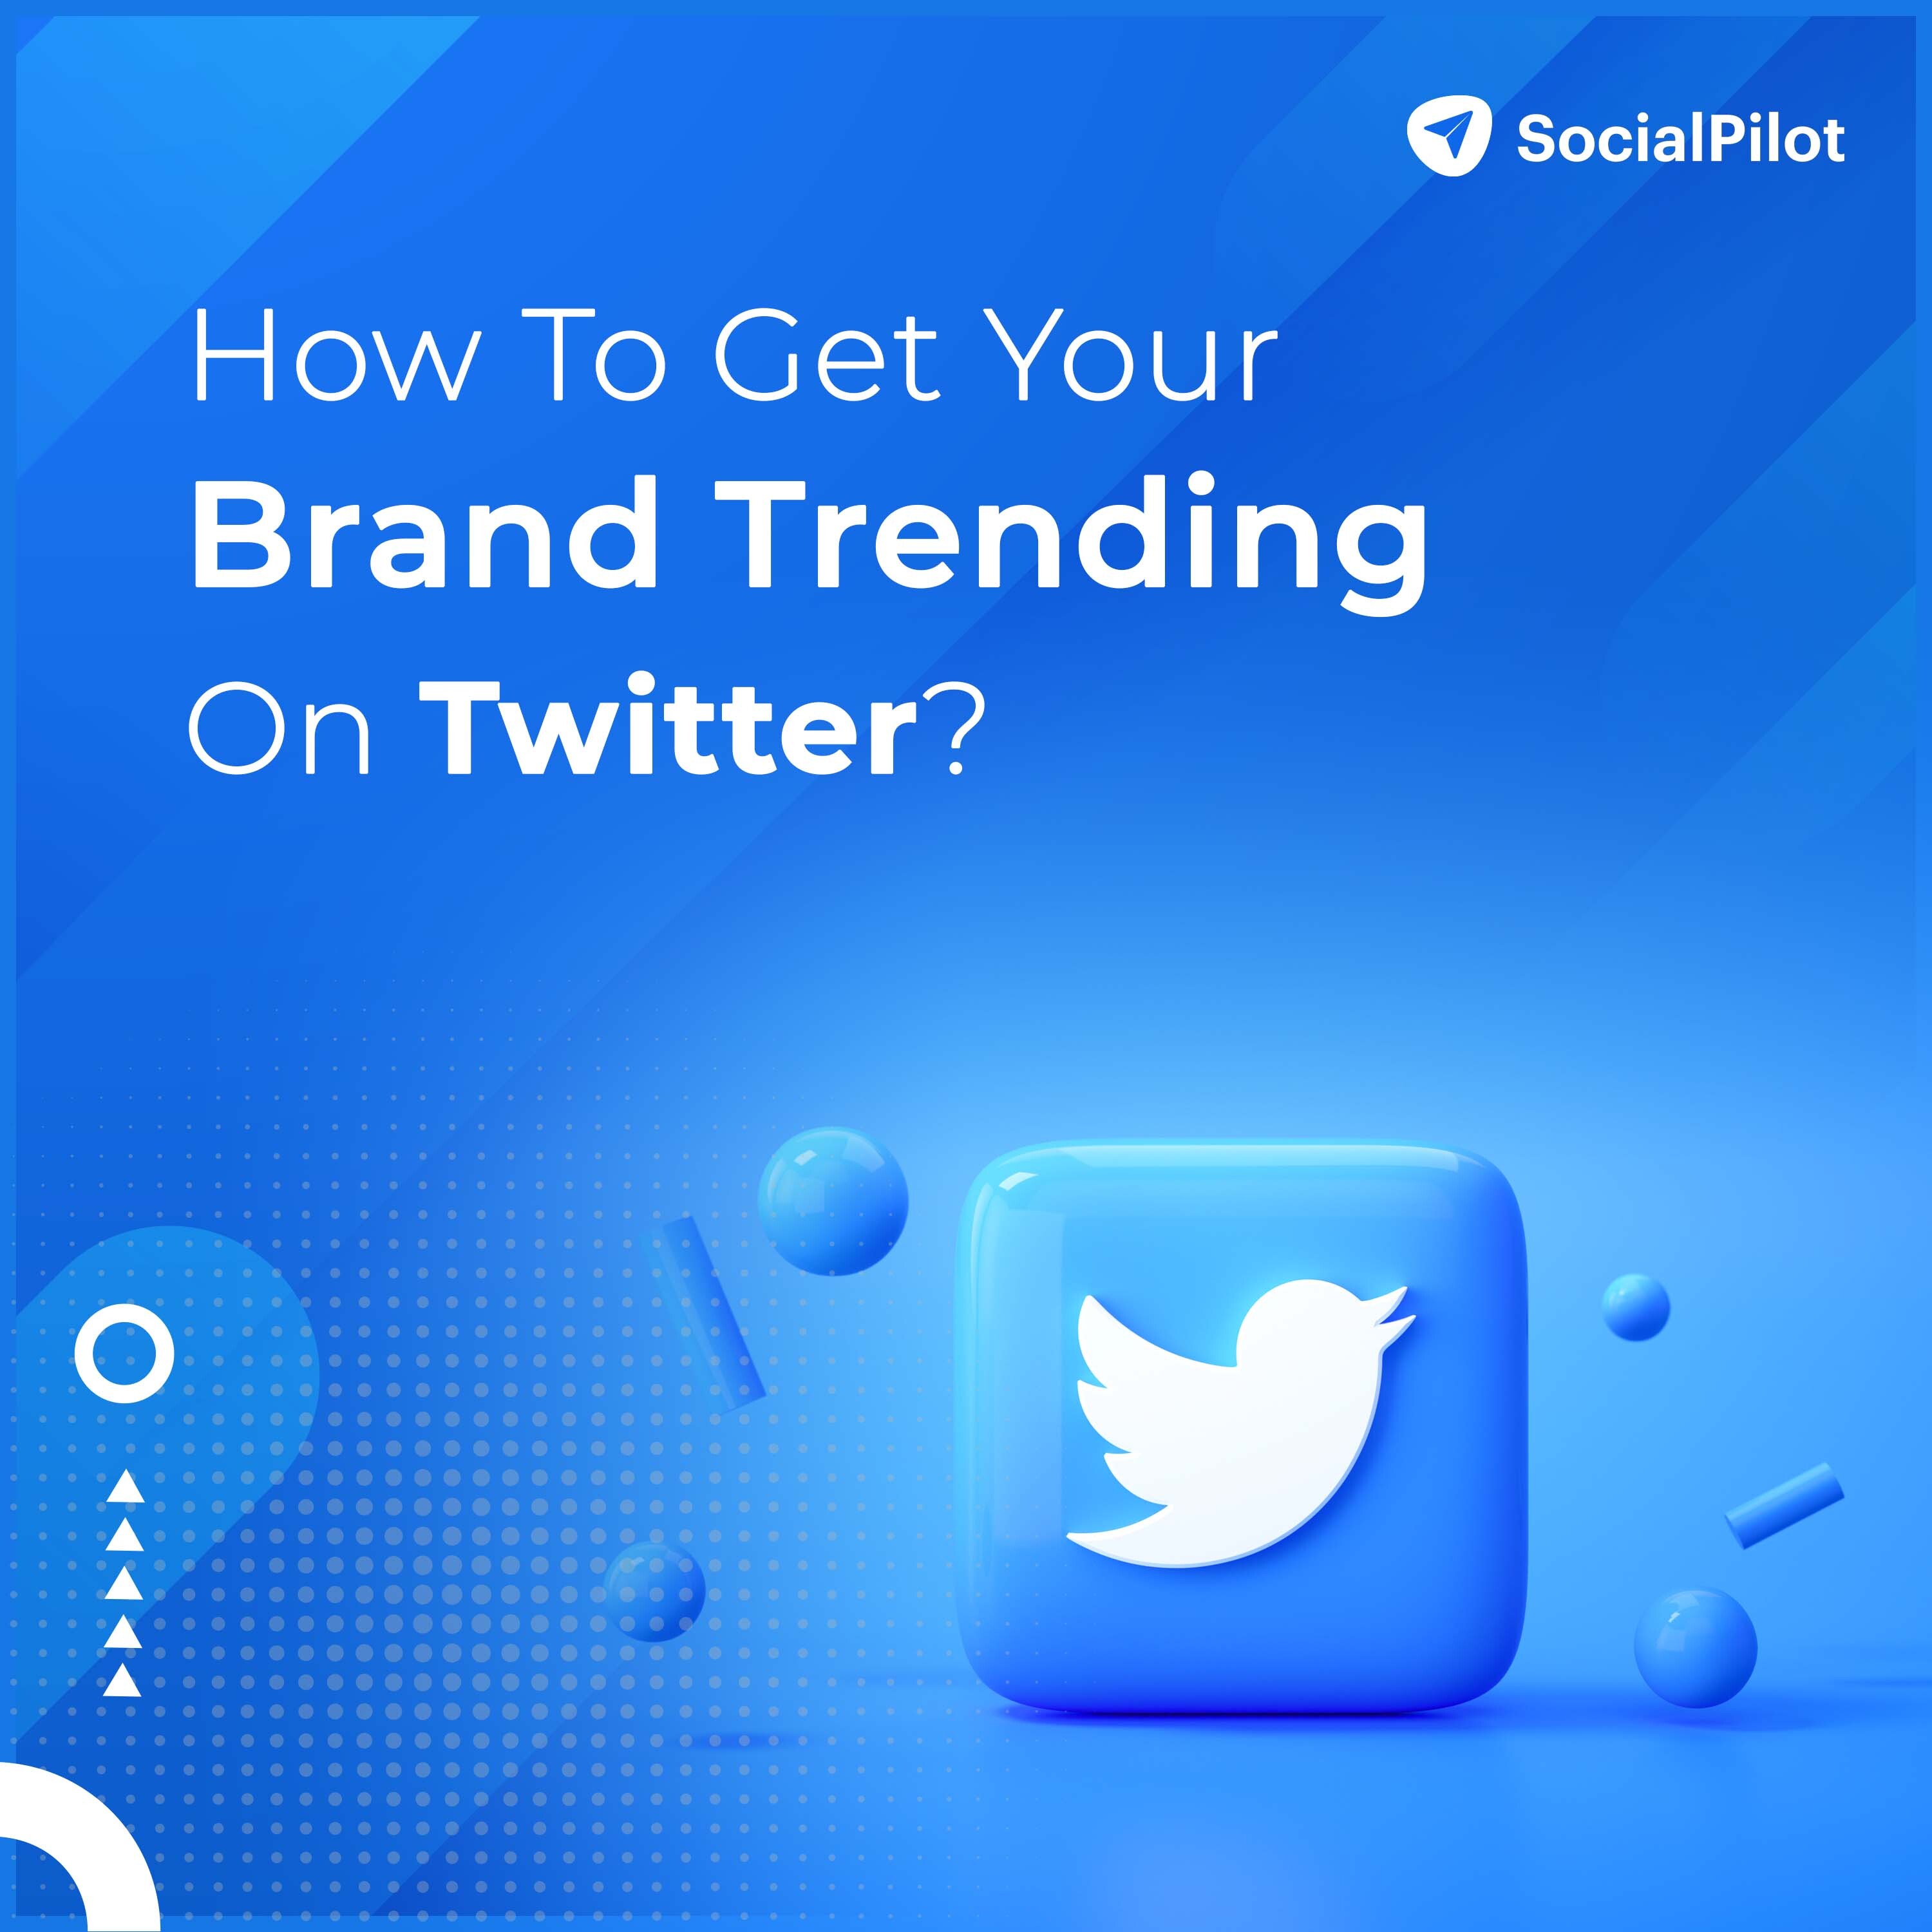 How to Get Your Brand Trending on Twitter in 2022